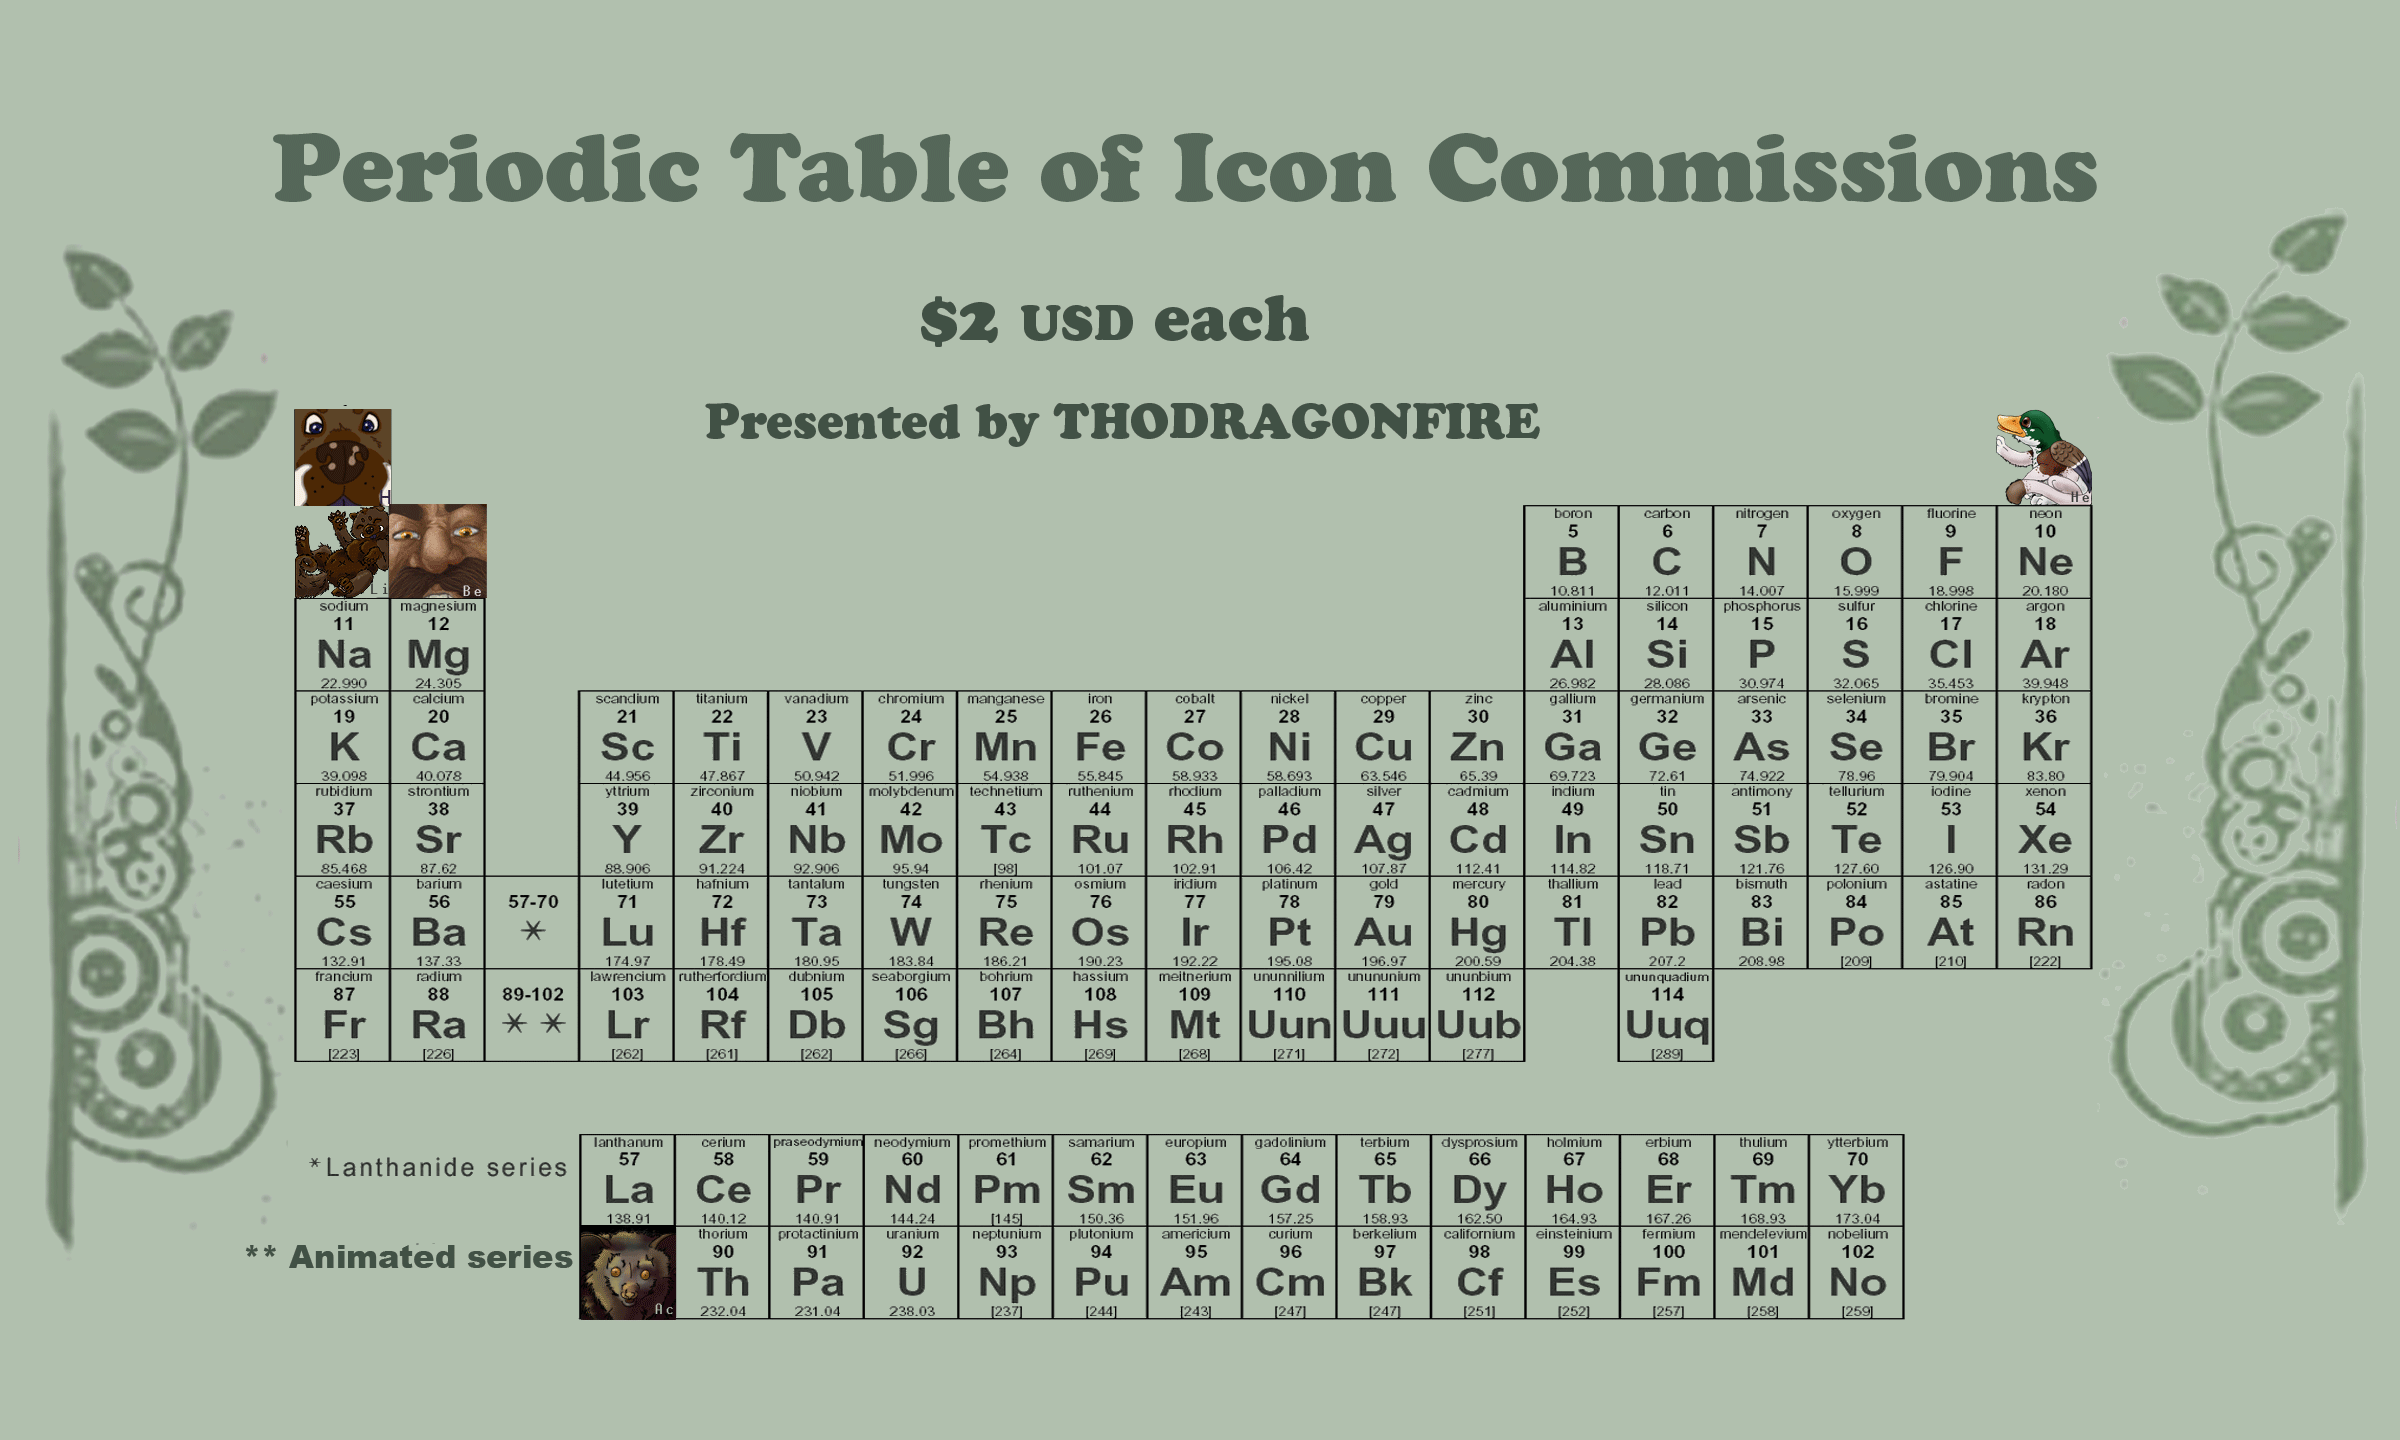 Periodic table o icons example by Boarfeathers on DeviantArt